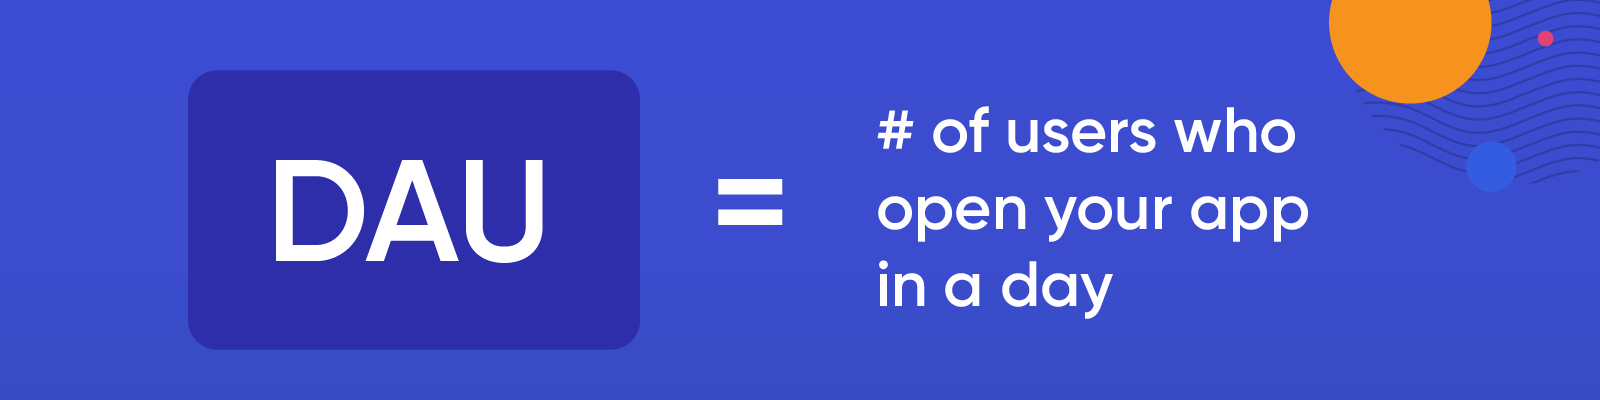 What are DAUs? The number of users who open your app in a day.